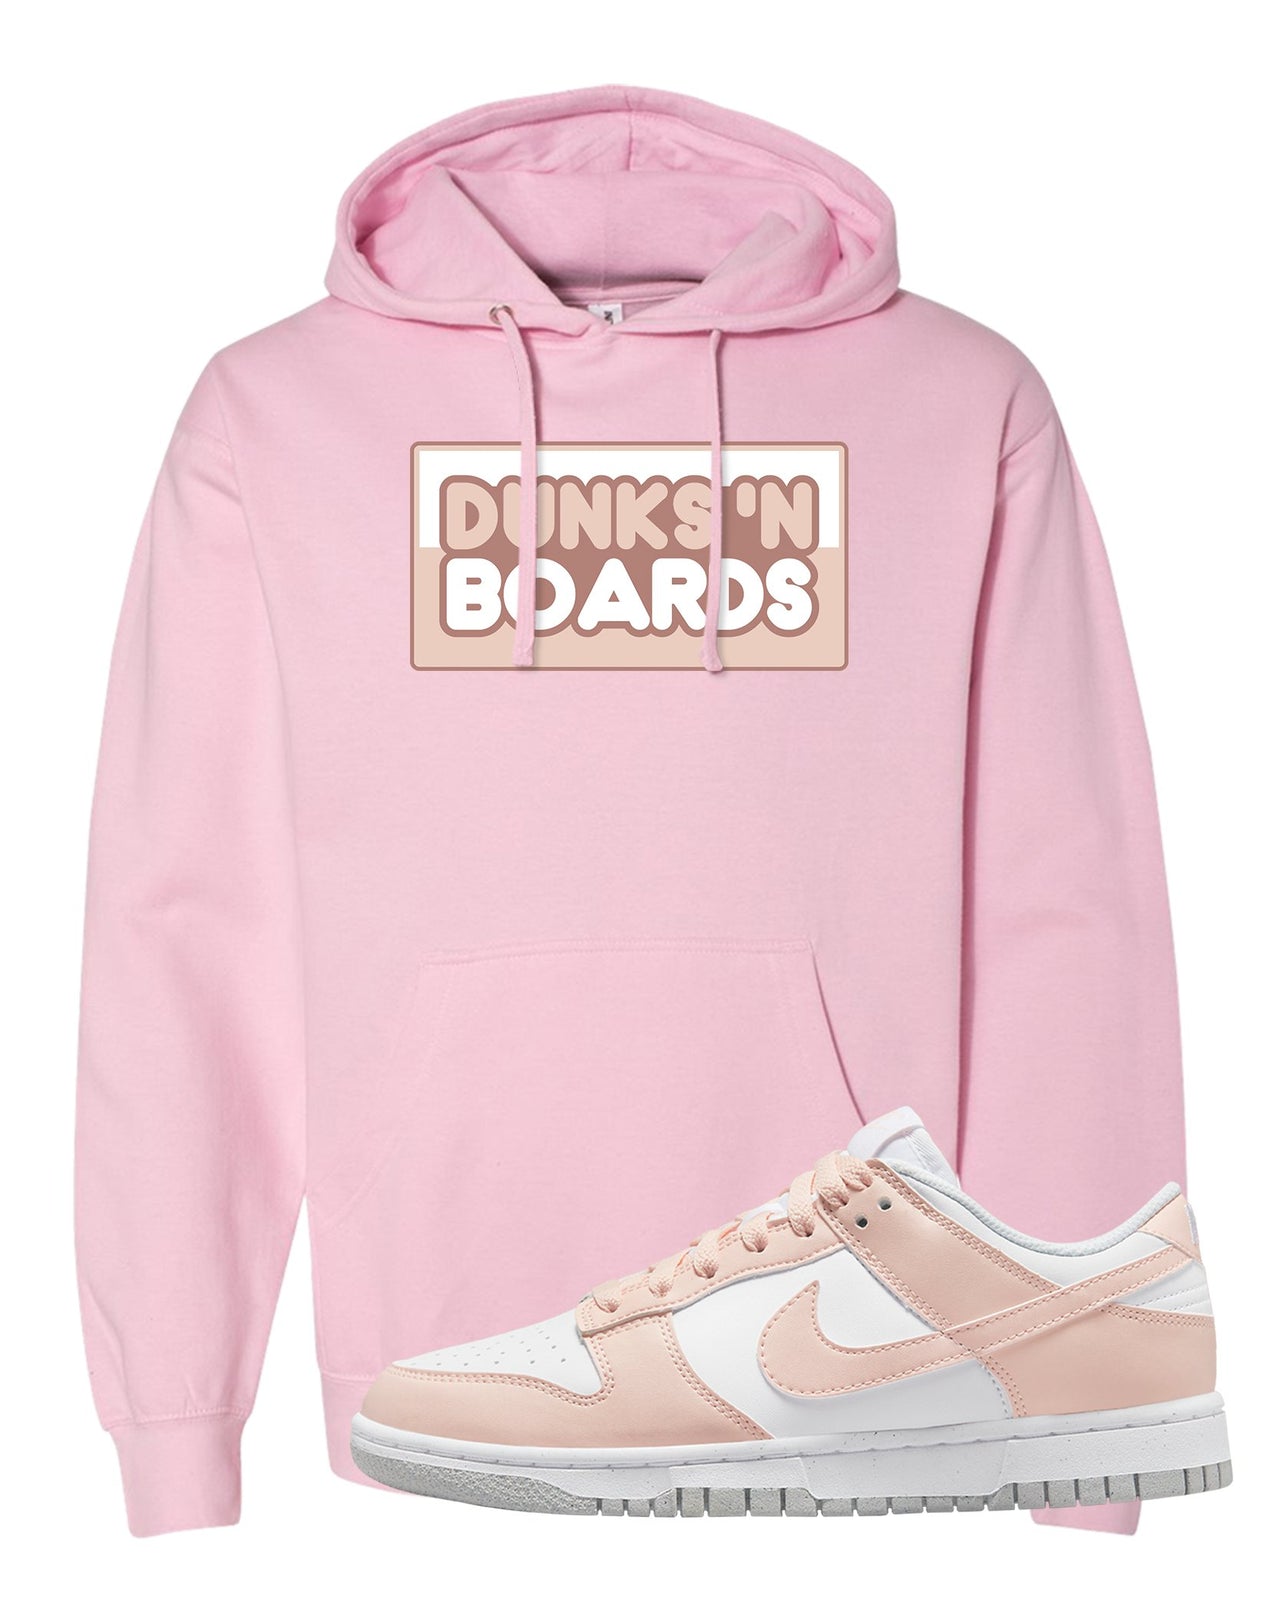 Next Nature Pale Citrus Low Dunks Hoodie | Dunks N Boards, Light Pink